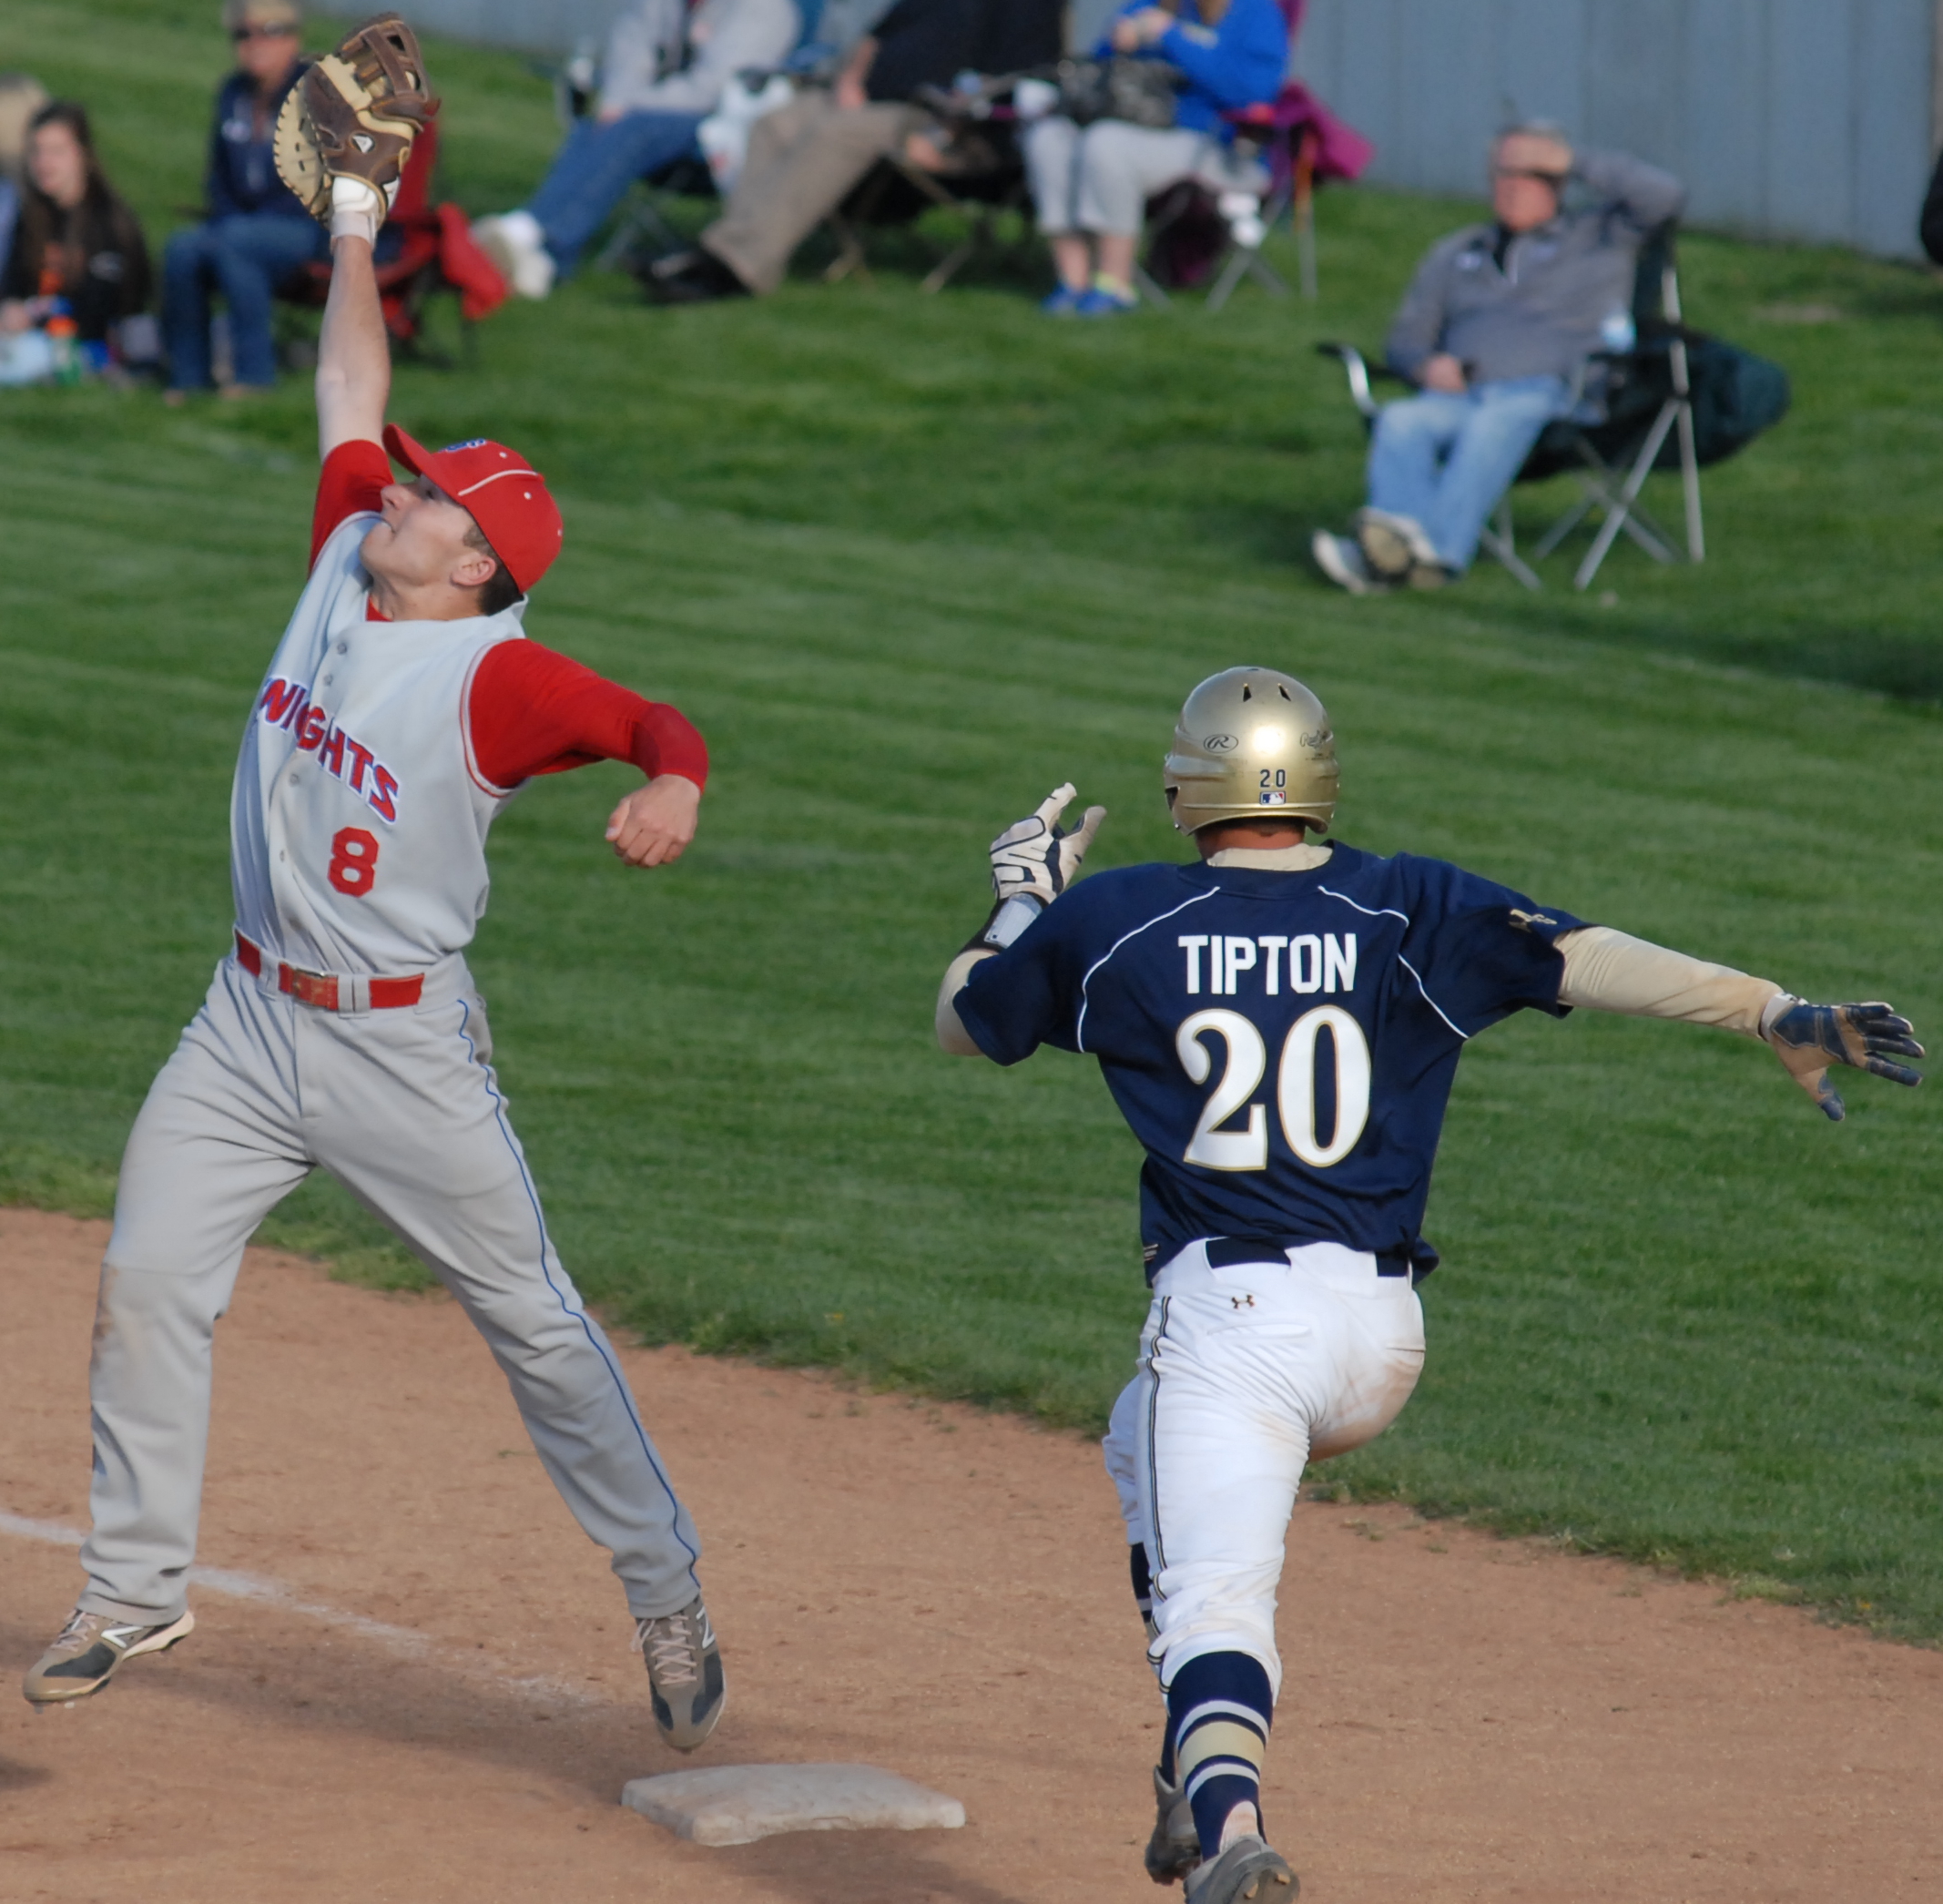 Matt Zmuda reaching up to snag the throw and get down on 1st base for an out on U of Toledo recruit Corey Tipton